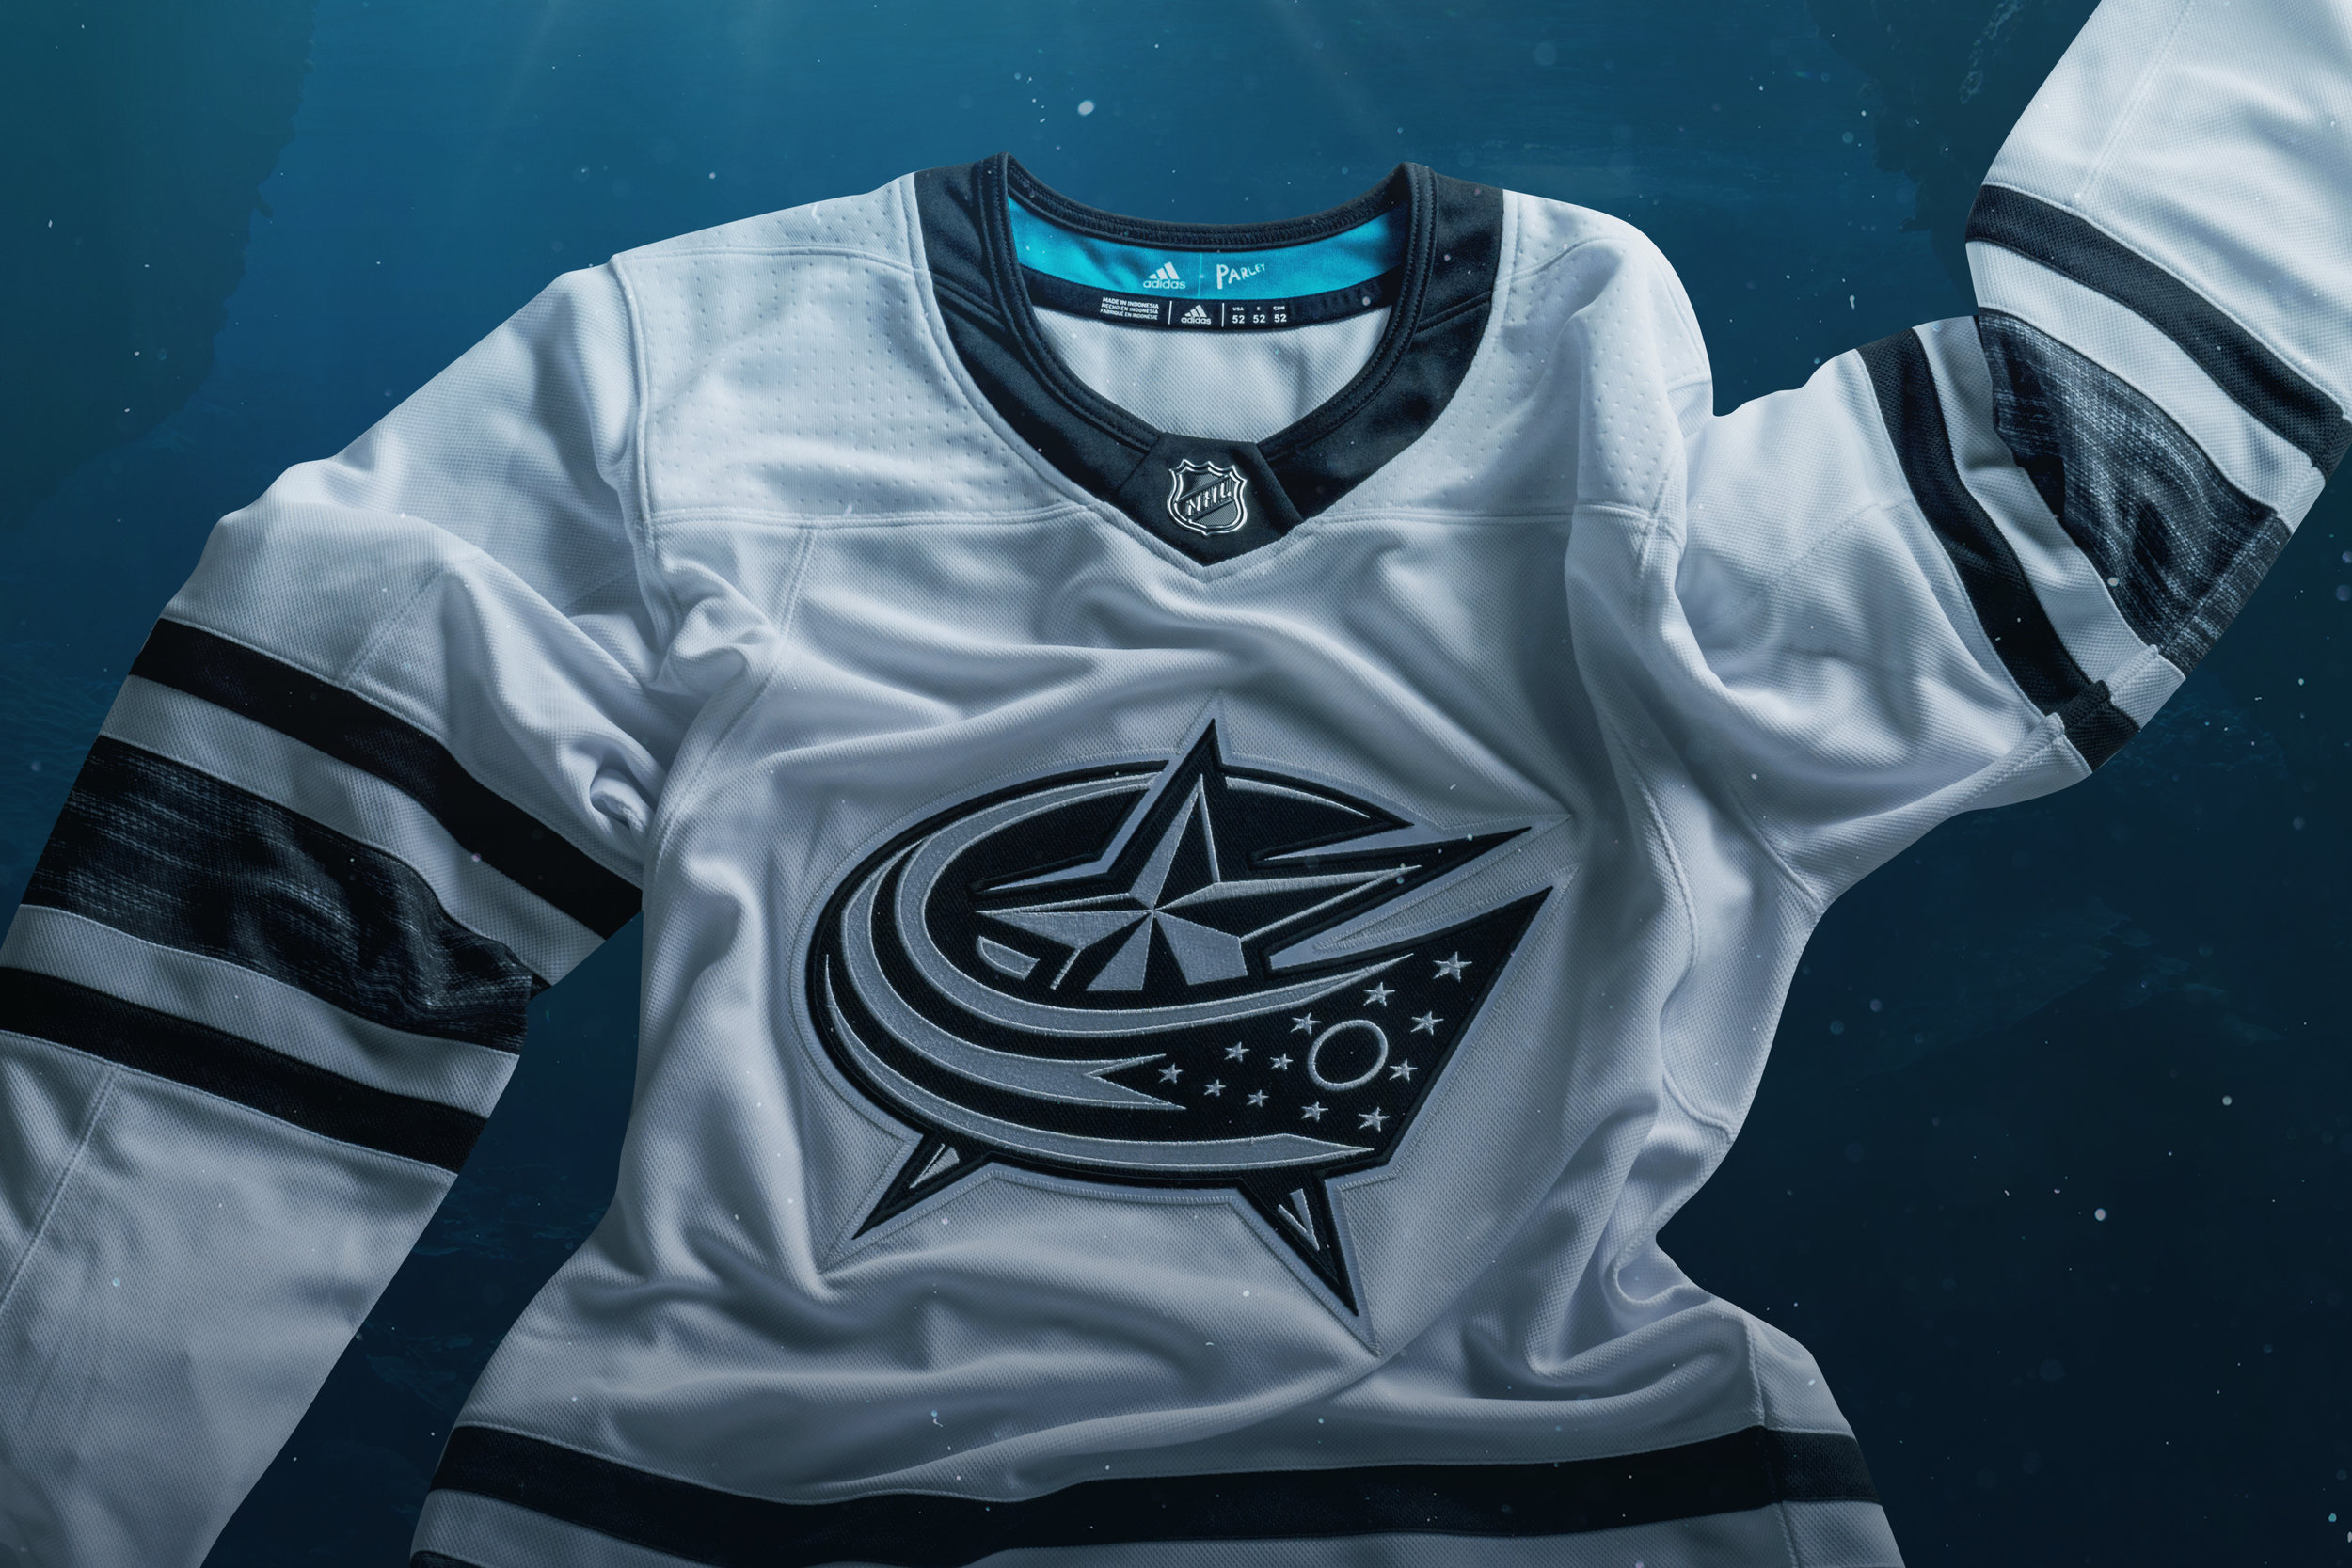 NHL's 2019 All-Star jerseys will be eco-friendly and feature team